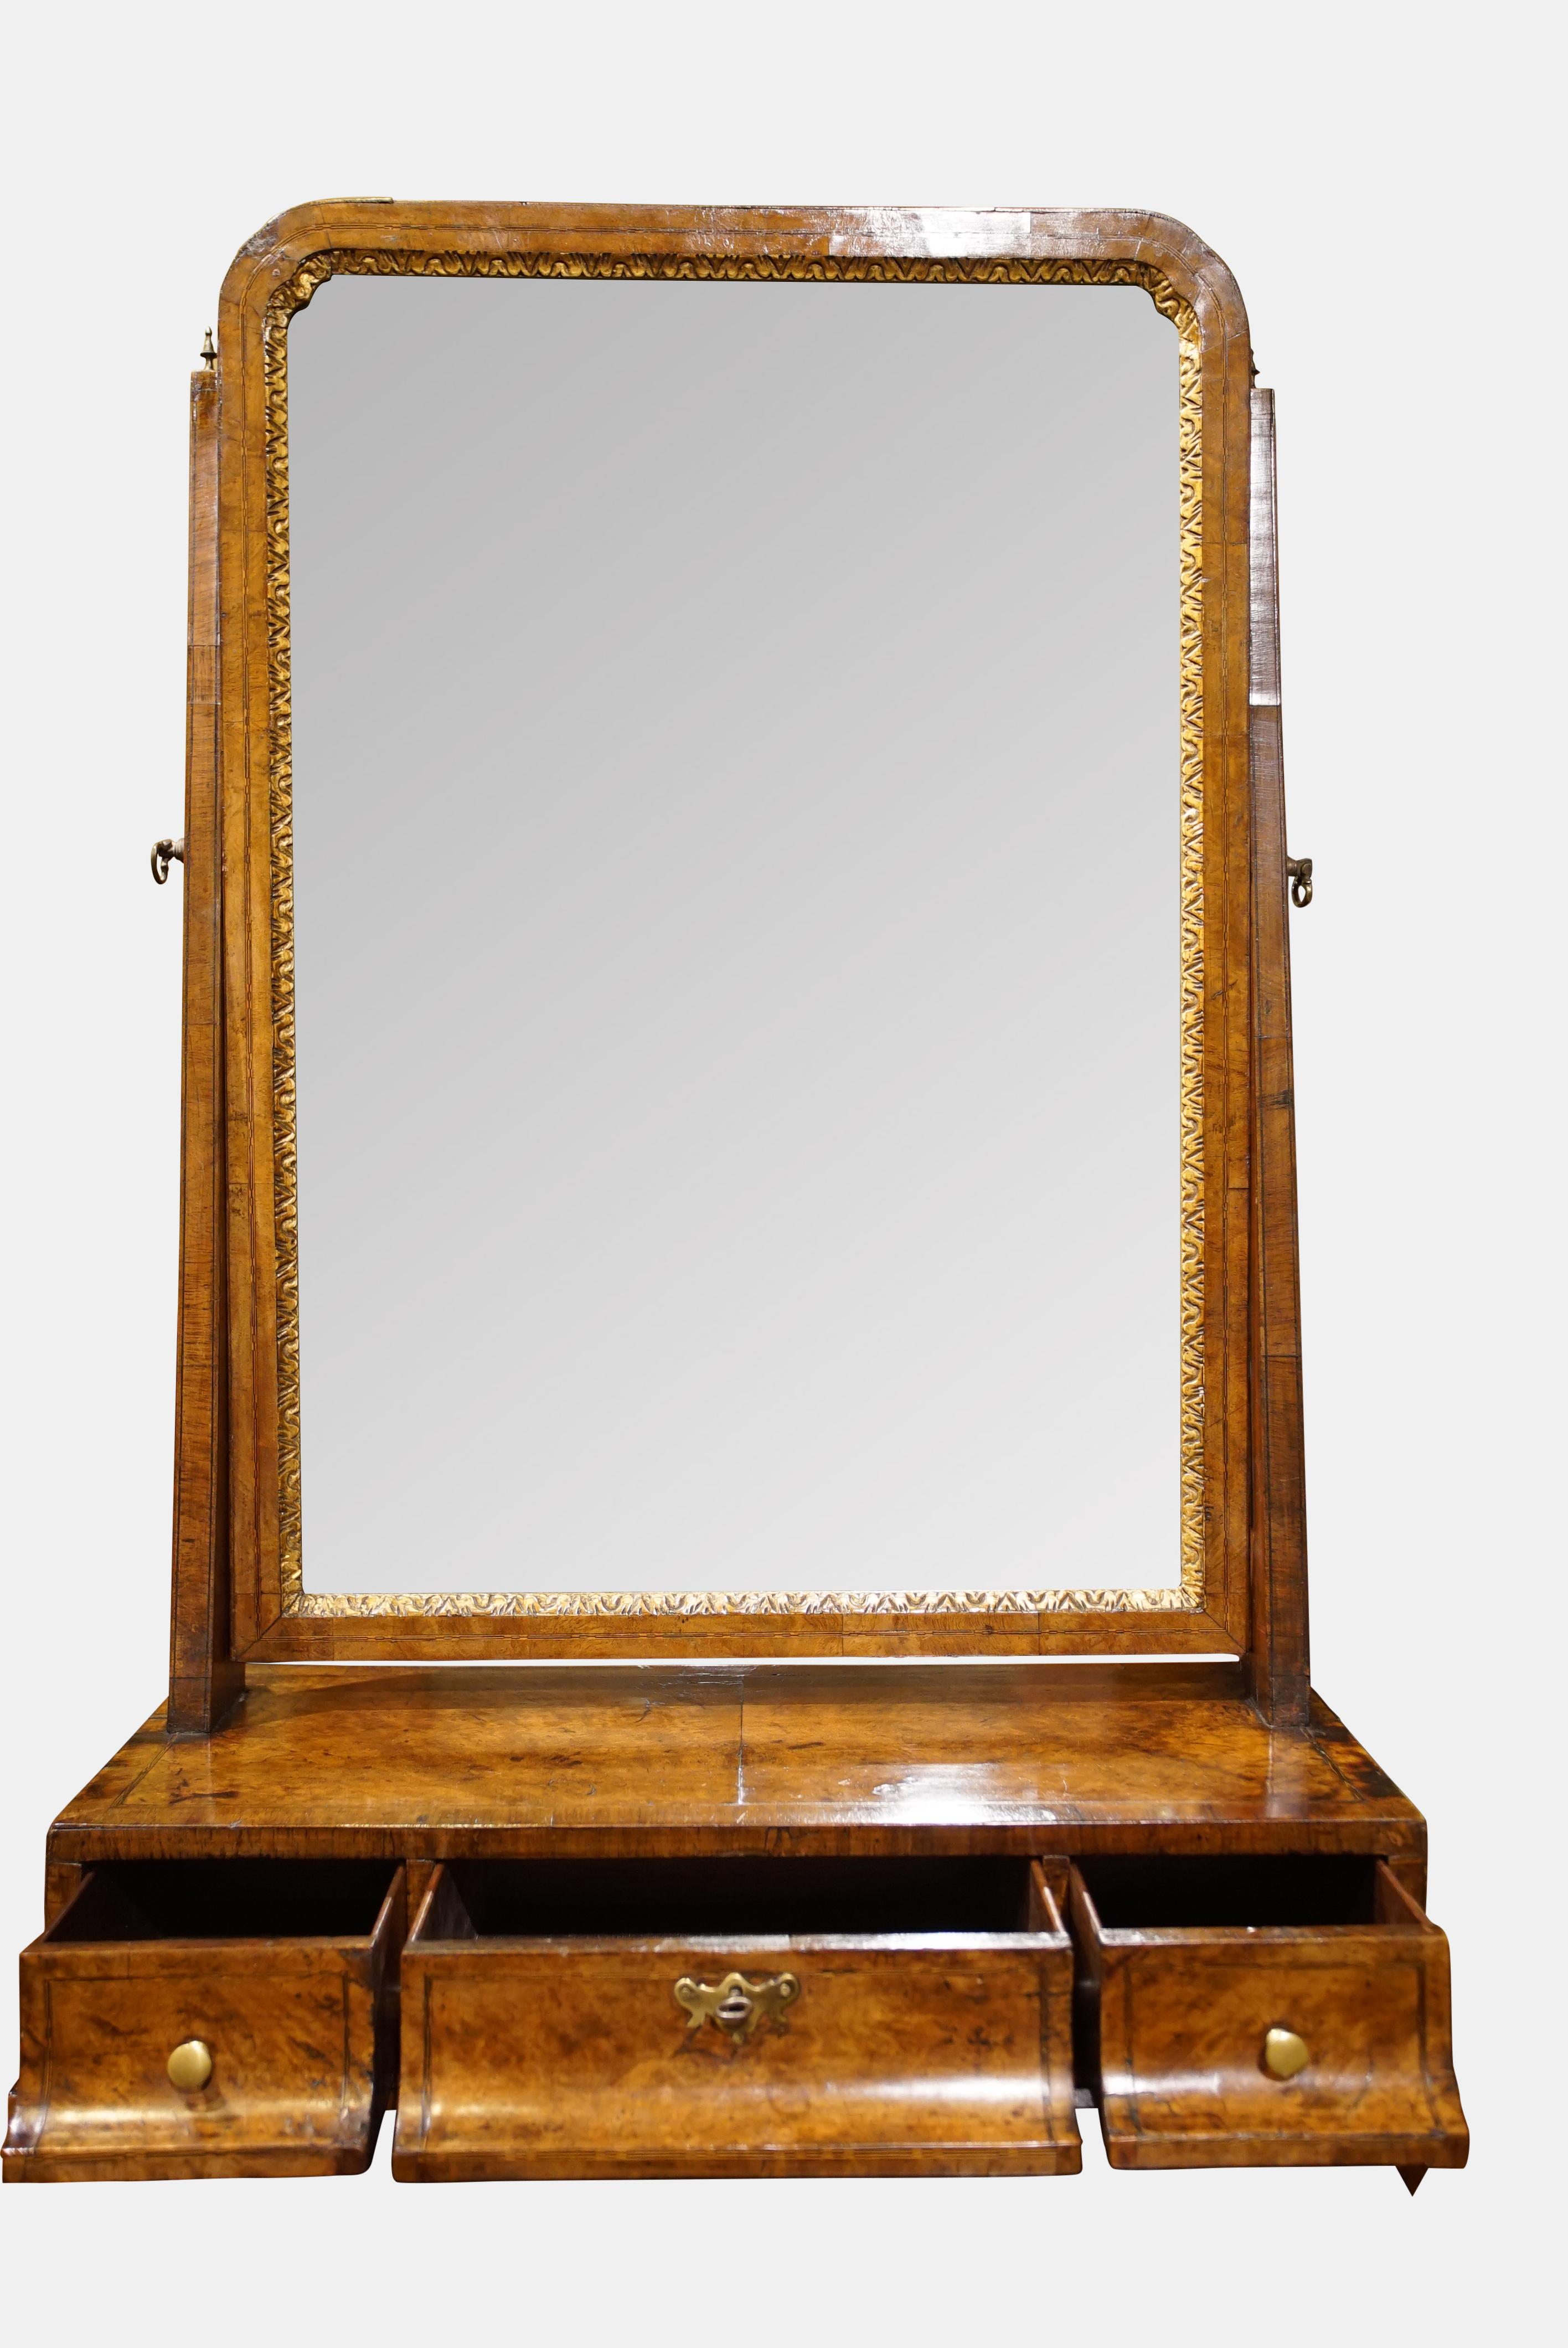 A George II walnut boxbase toilet mirror of large size, veneered in burr walnut, with three drawers below the mirror plate with carved gilt slip, all inlaid fine chequer lines. (Feet Restored)




circa 1740.